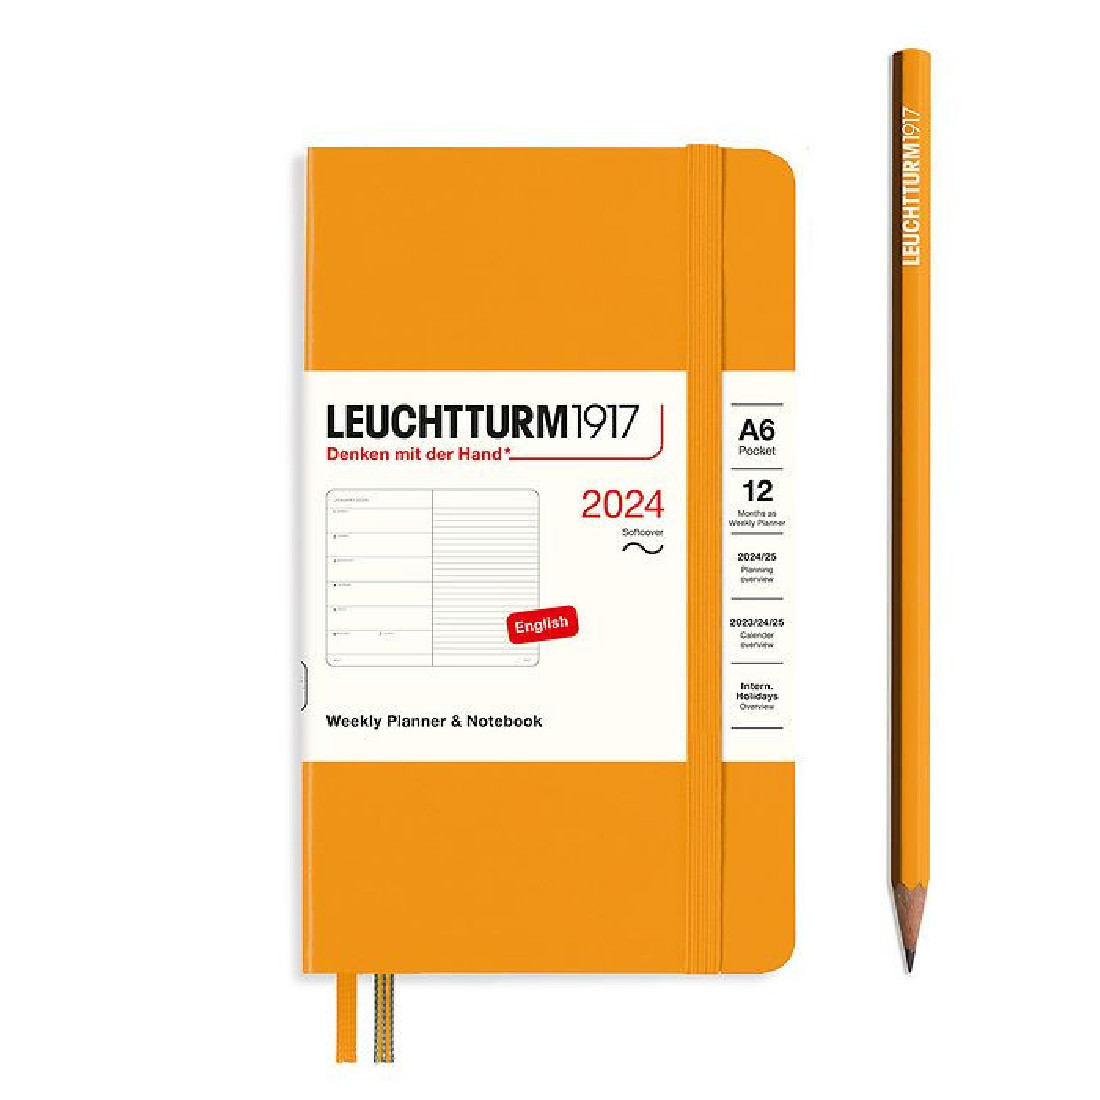 Leuchtturm 1917 Weekly Planner and Notebook 2024 Rising Sun Pocket A6 Soft Cover